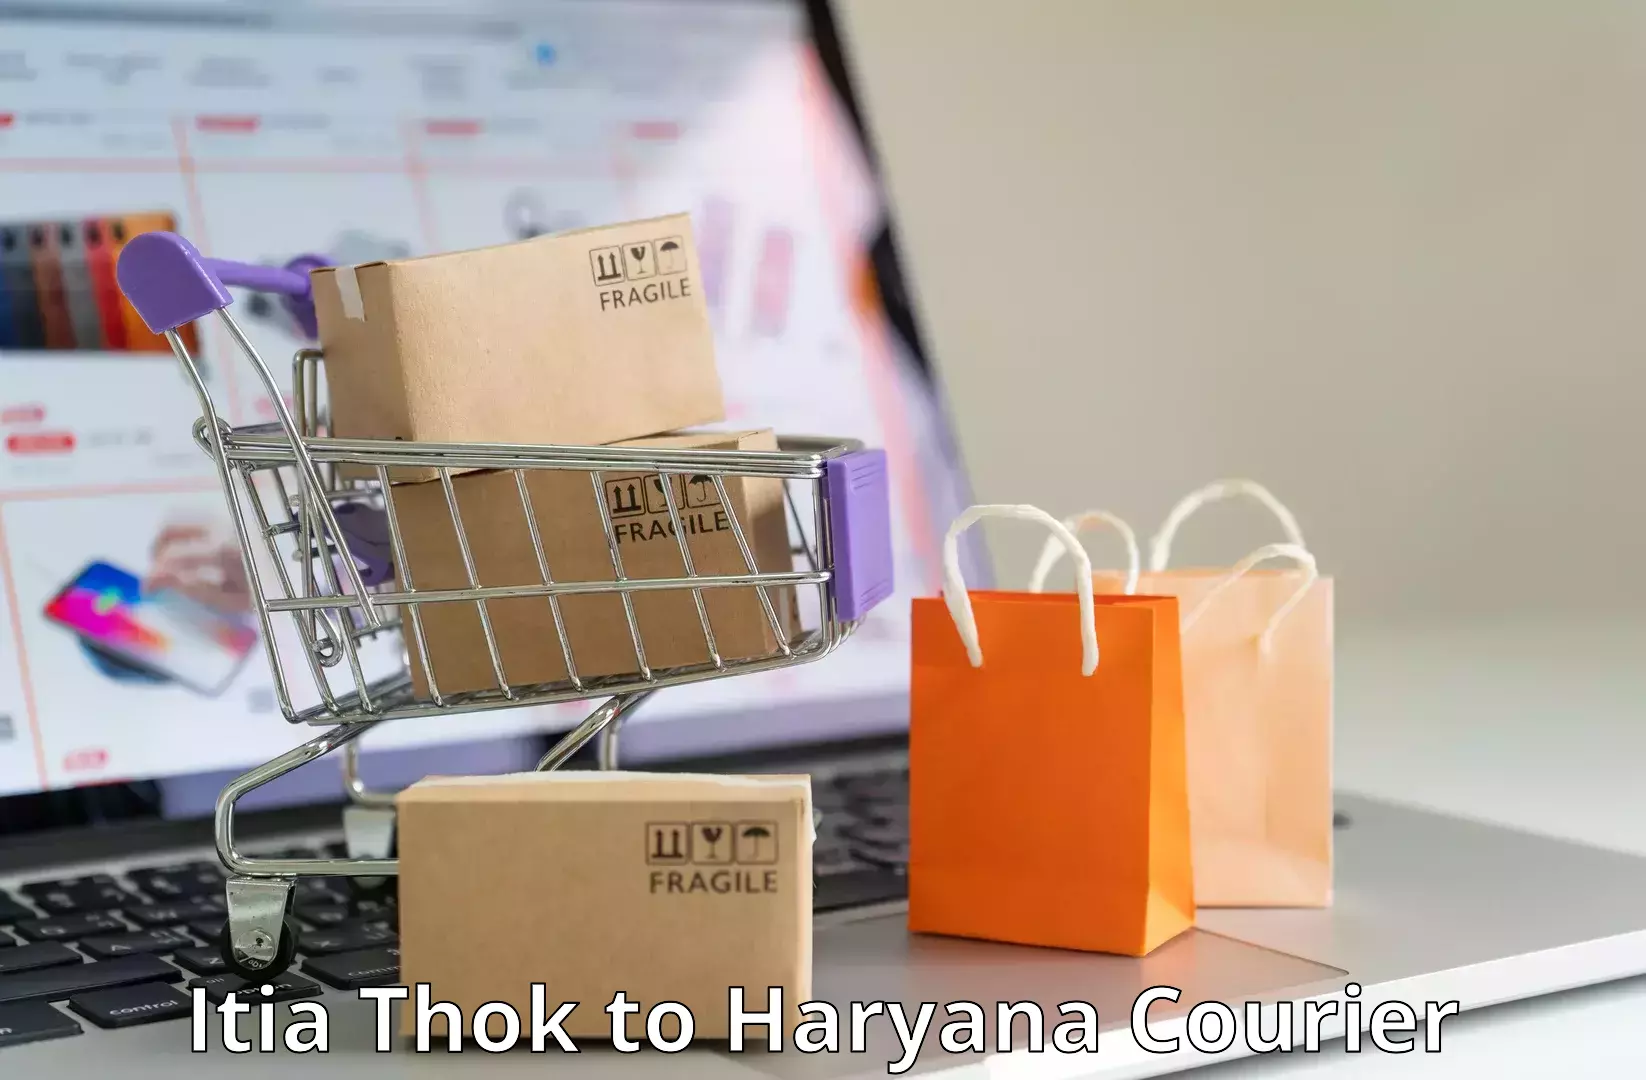 Fast shipping solutions Itia Thok to Bhuna